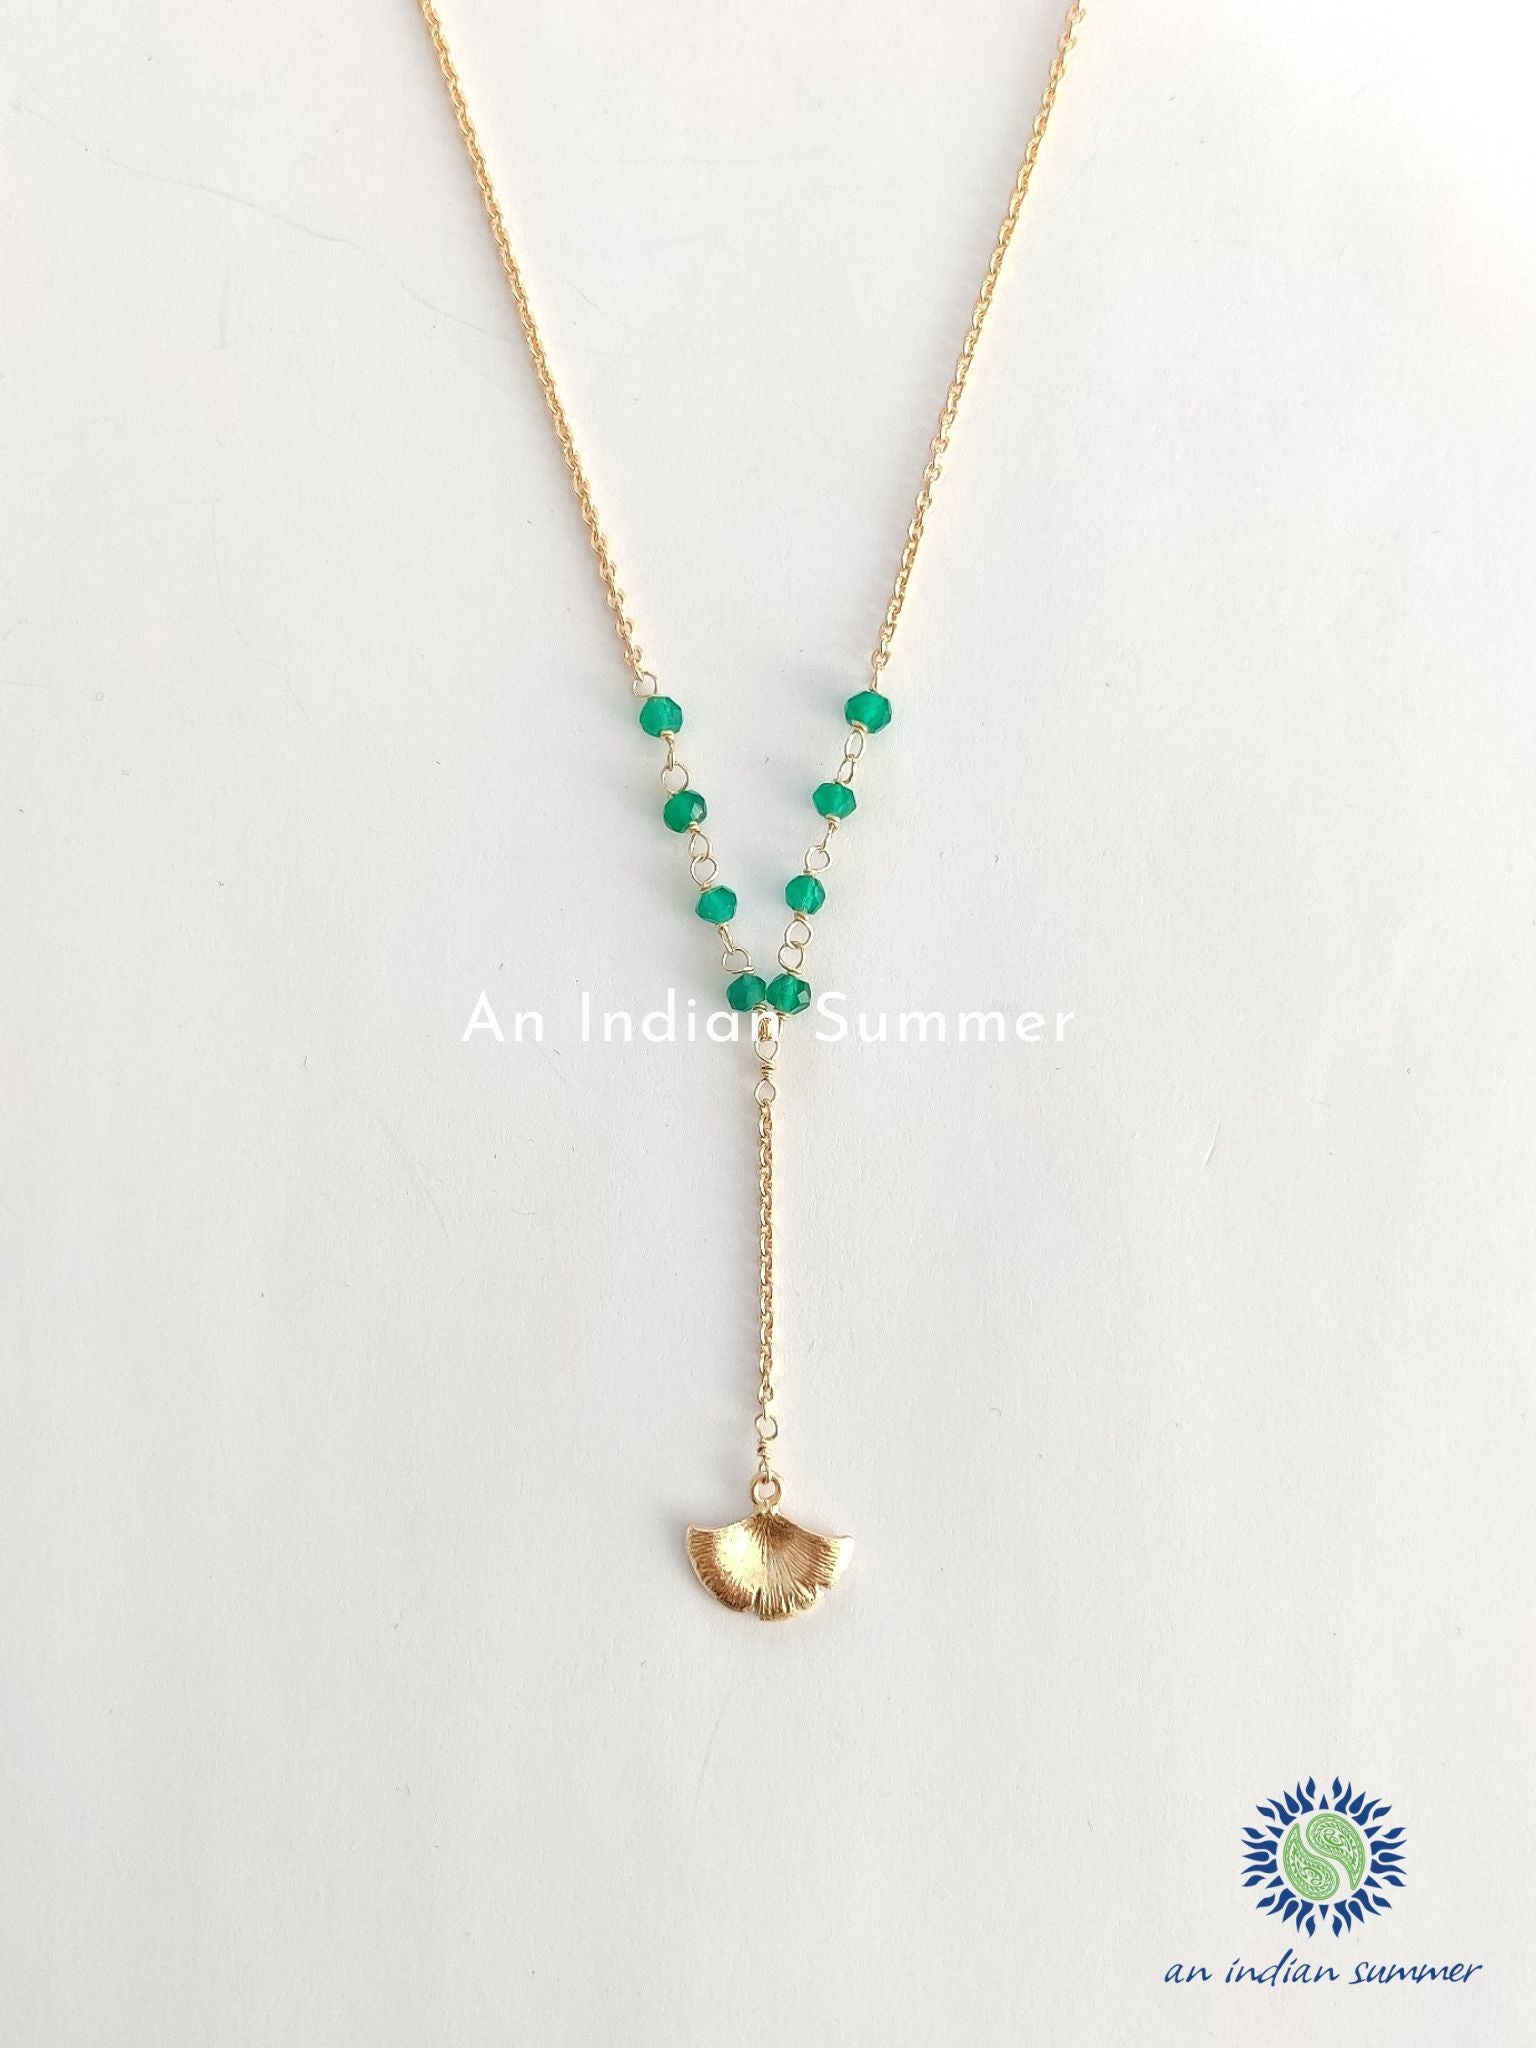 Ginkgo Necklace | Green Onyx | 22 Carat Gold Plated Semi Precious Stones | An Indian Summer | Seasonless Timeless Sustainable Ethical Authentic Artisan Conscious Clothing Lifestyle Brand